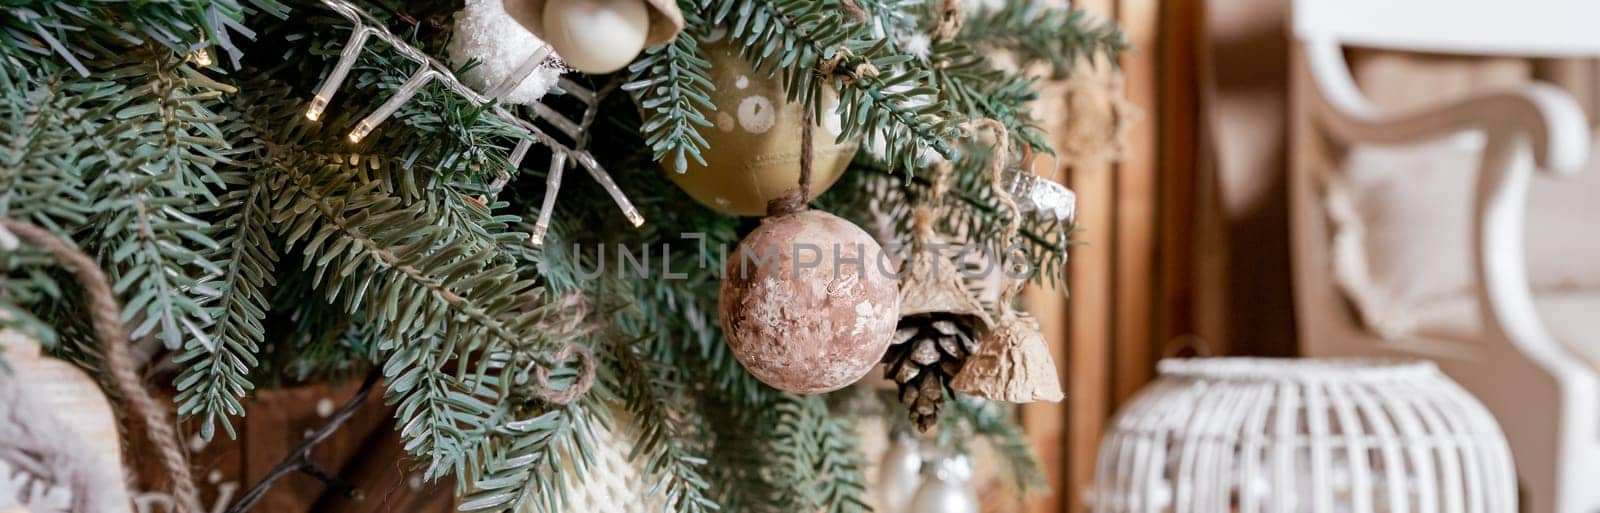 Diy wooden, paper christmas ornaments hanging from Christmas tree.Festive winter holidays background